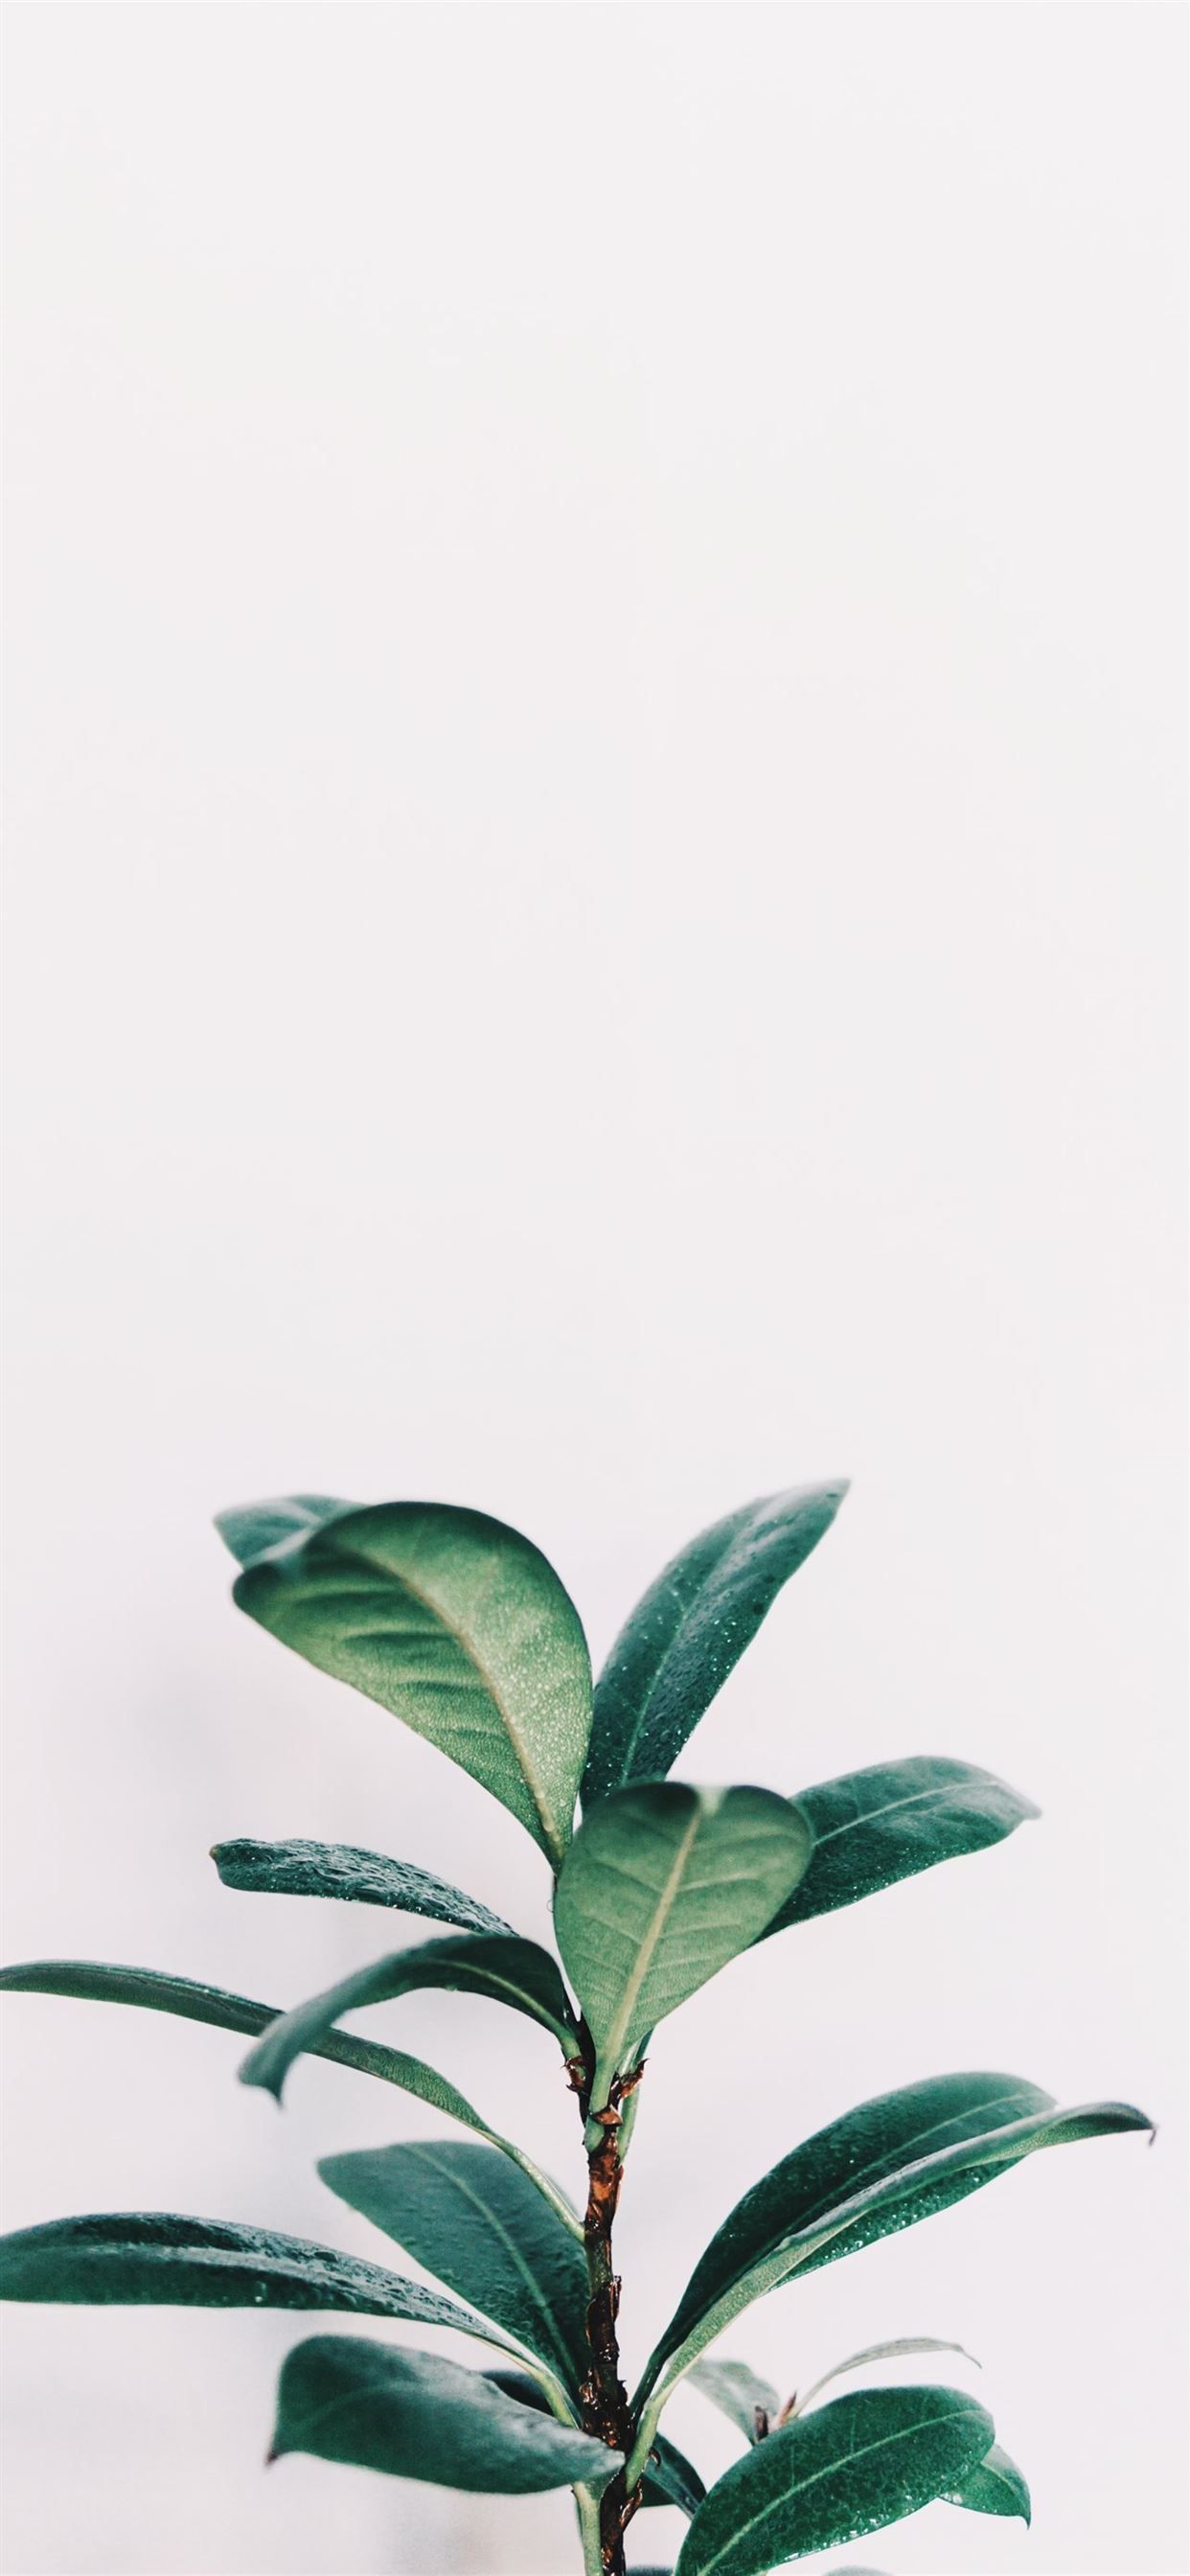 green leafed plant closeup photo iPhone 11 Wallpaper Free Download